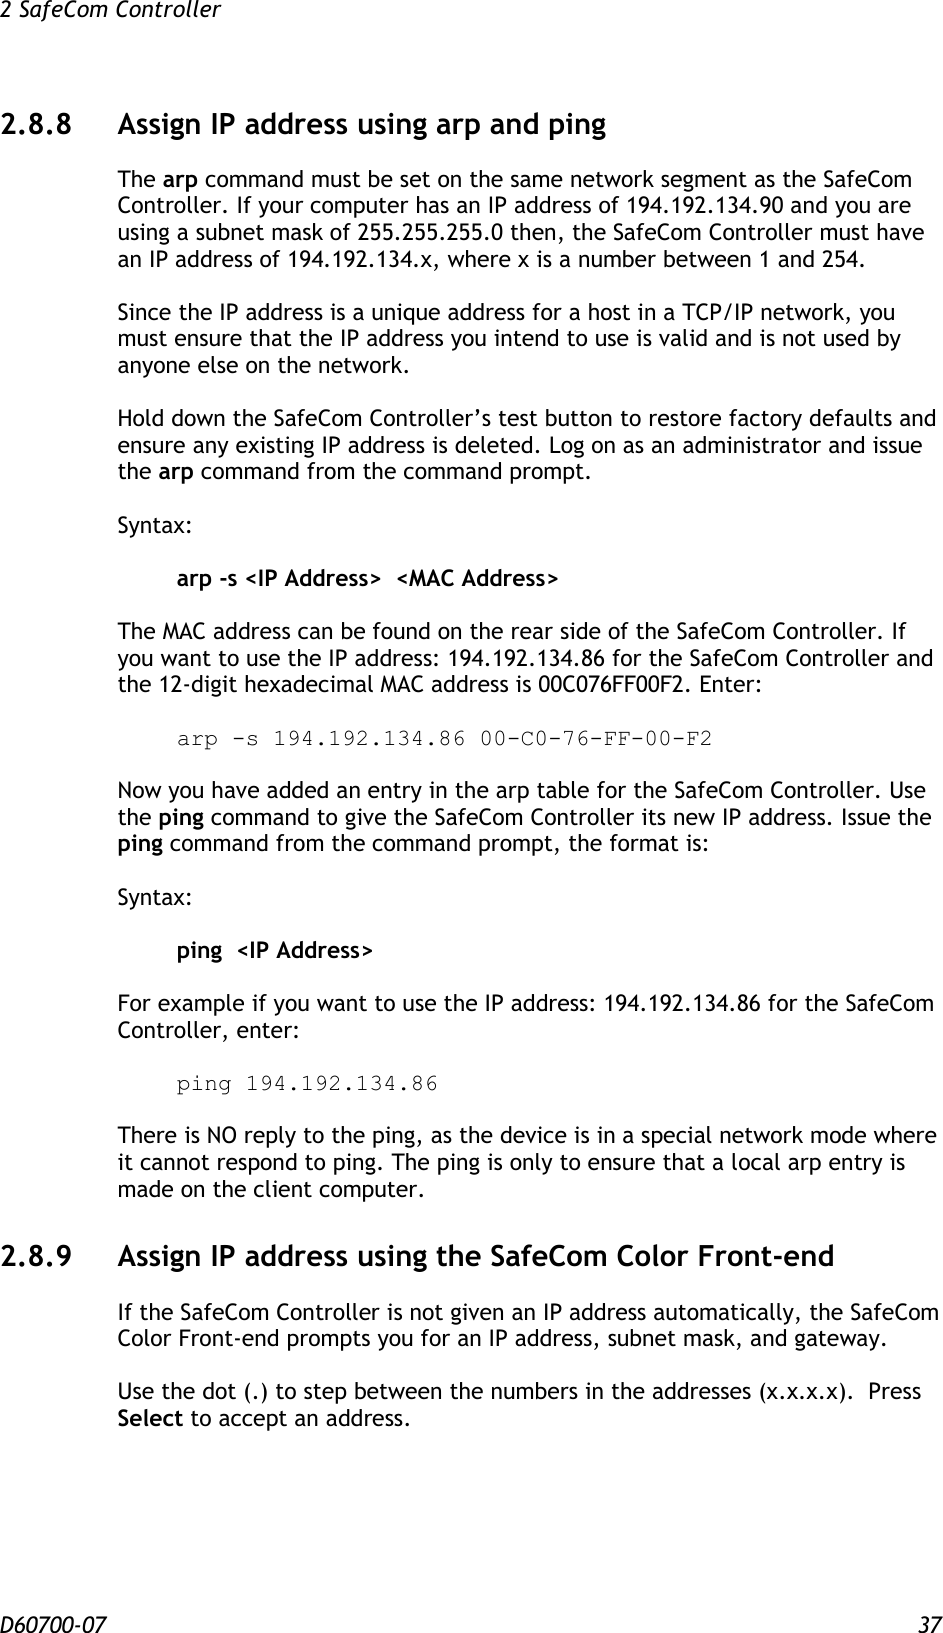 2 SafeCom Controller  D60700-07 37 2.8.8 Assign IP address using arp and ping The arp command must be set on the same network segment as the SafeCom Controller. If your computer has an IP address of 194.192.134.90 and you are using a subnet mask of 255.255.255.0 then, the SafeCom Controller must have an IP address of 194.192.134.x, where x is a number between 1 and 254.   Since the IP address is a unique address for a host in a TCP/IP network, you must ensure that the IP address you intend to use is valid and is not used by anyone else on the network.   Hold down the SafeCom Controller’s test button to restore factory defaults and ensure any existing IP address is deleted. Log on as an administrator and issue the arp command from the command prompt.     Syntax:   arp -s &lt;IP Address&gt;  &lt;MAC Address&gt;   The MAC address can be found on the rear side of the SafeCom Controller. If you want to use the IP address: 194.192.134.86 for the SafeCom Controller and the 12-digit hexadecimal MAC address is 00C076FF00F2. Enter:    arp -s 194.192.134.86 00-C0-76-FF-00-F2  Now you have added an entry in the arp table for the SafeCom Controller. Use the ping command to give the SafeCom Controller its new IP address. Issue the ping command from the command prompt, the format is:     Syntax:     ping  &lt;IP Address&gt;     For example if you want to use the IP address: 194.192.134.86 for the SafeCom Controller, enter:    ping 194.192.134.86  There is NO reply to the ping, as the device is in a special network mode where it cannot respond to ping. The ping is only to ensure that a local arp entry is made on the client computer. 2.8.9 Assign IP address using the SafeCom Color Front-end If the SafeCom Controller is not given an IP address automatically, the SafeCom Color Front-end prompts you for an IP address, subnet mask, and gateway.  Use the dot (.) to step between the numbers in the addresses (x.x.x.x).  Press Select to accept an address.  